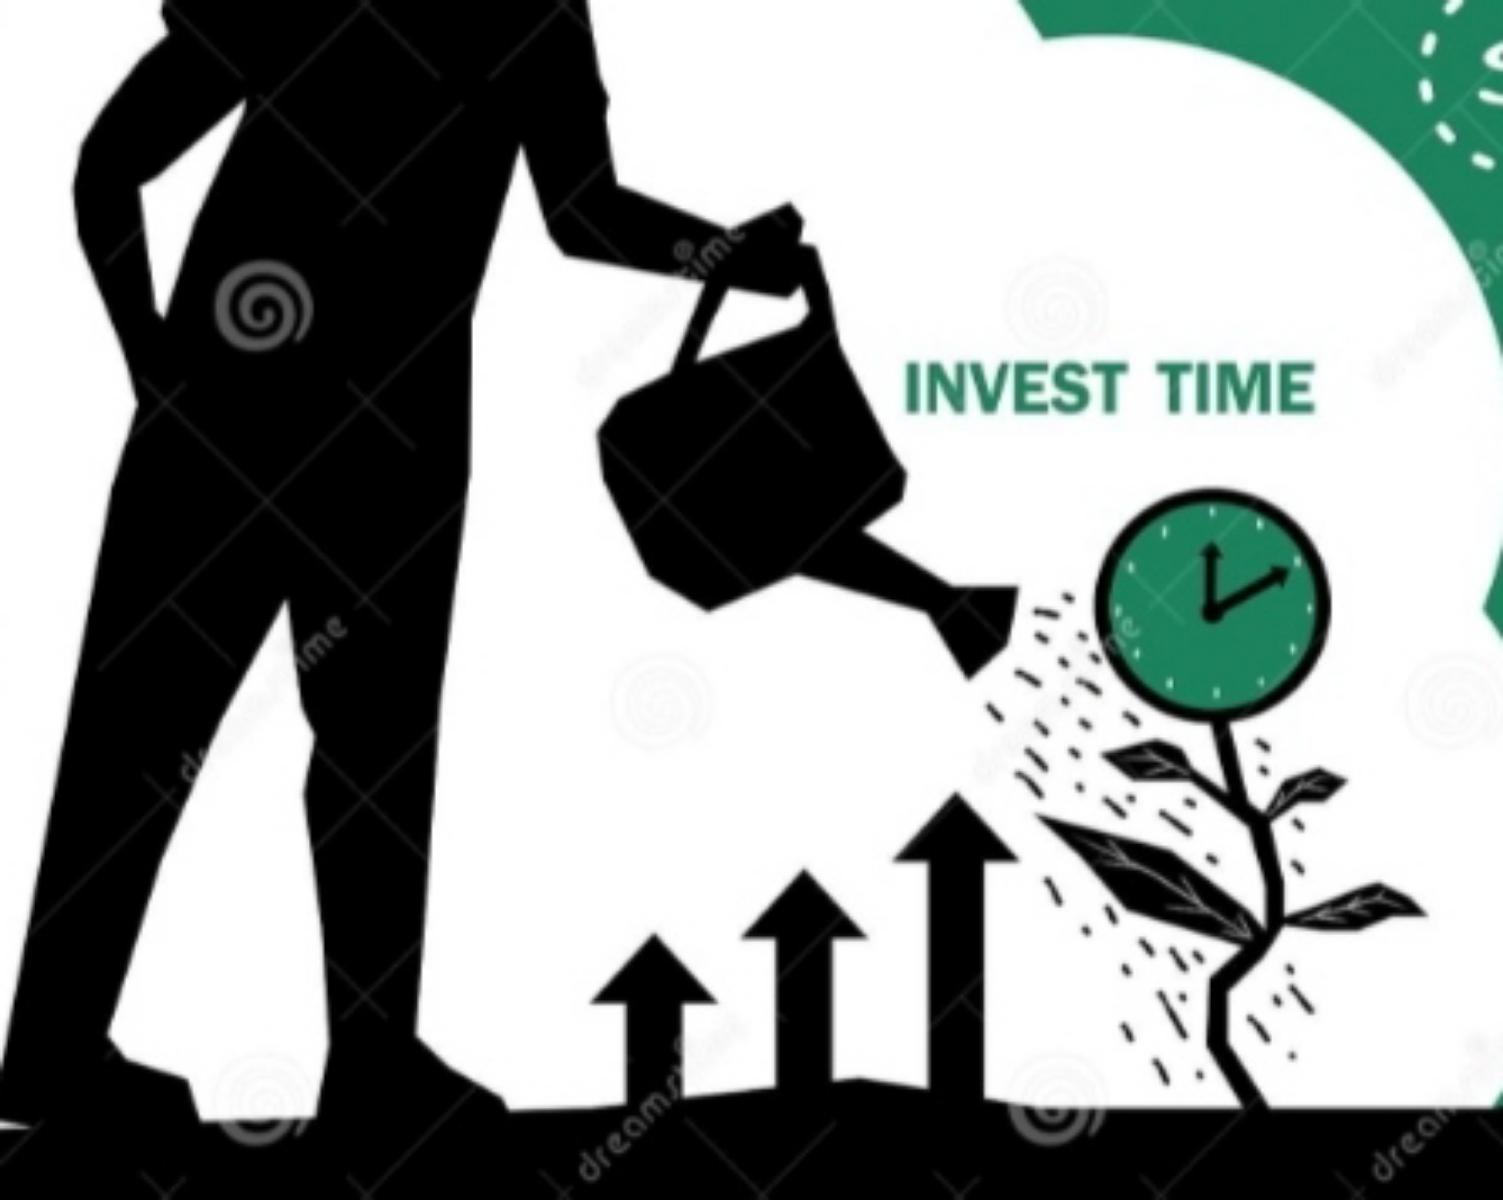 4. Invest Time To Grow Daily